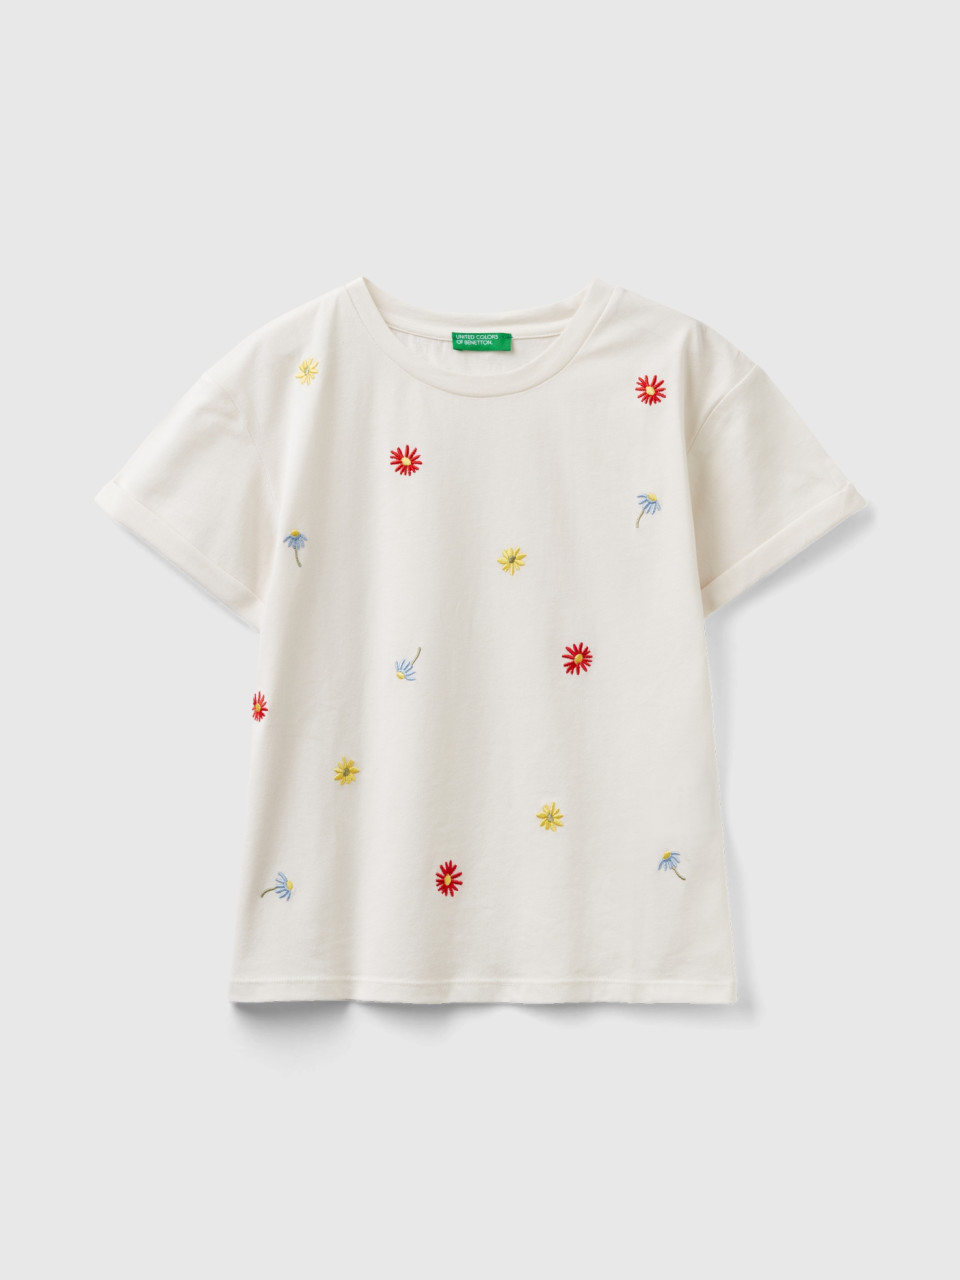 Benetton, T-shirt With Embroidered Flowers, Creamy White, Kids